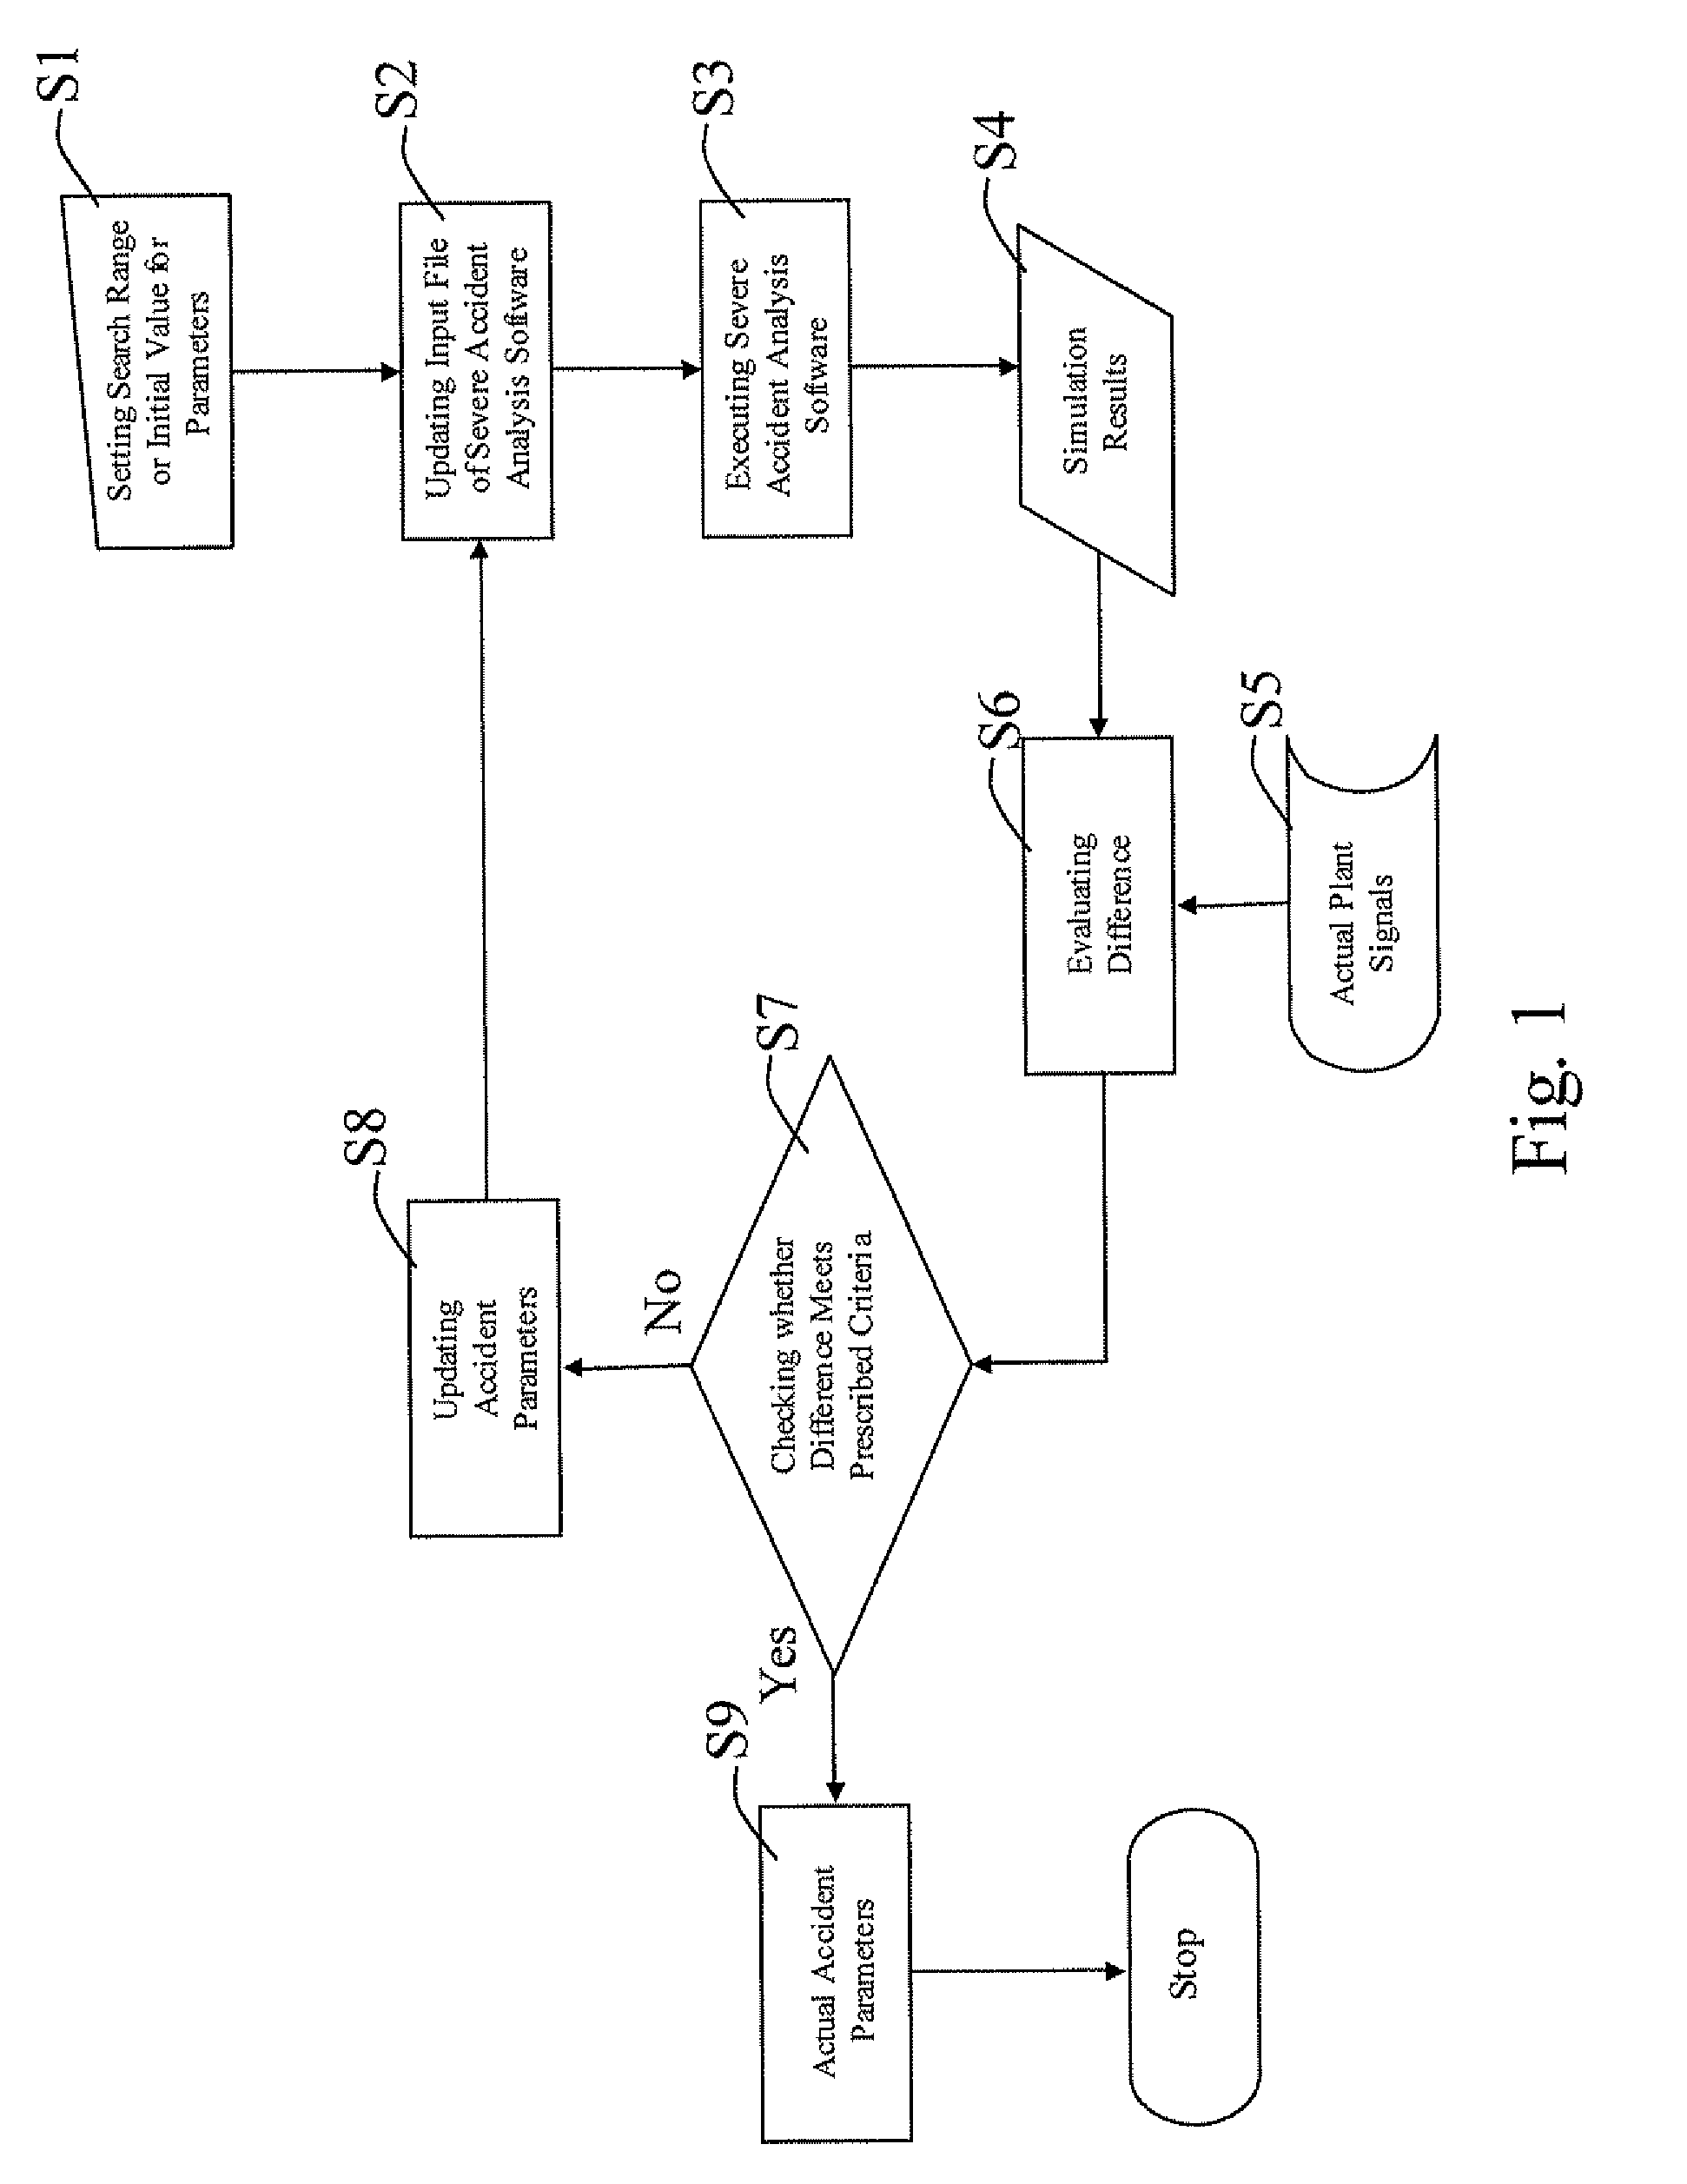 Accident parameter identification method for severe accidents